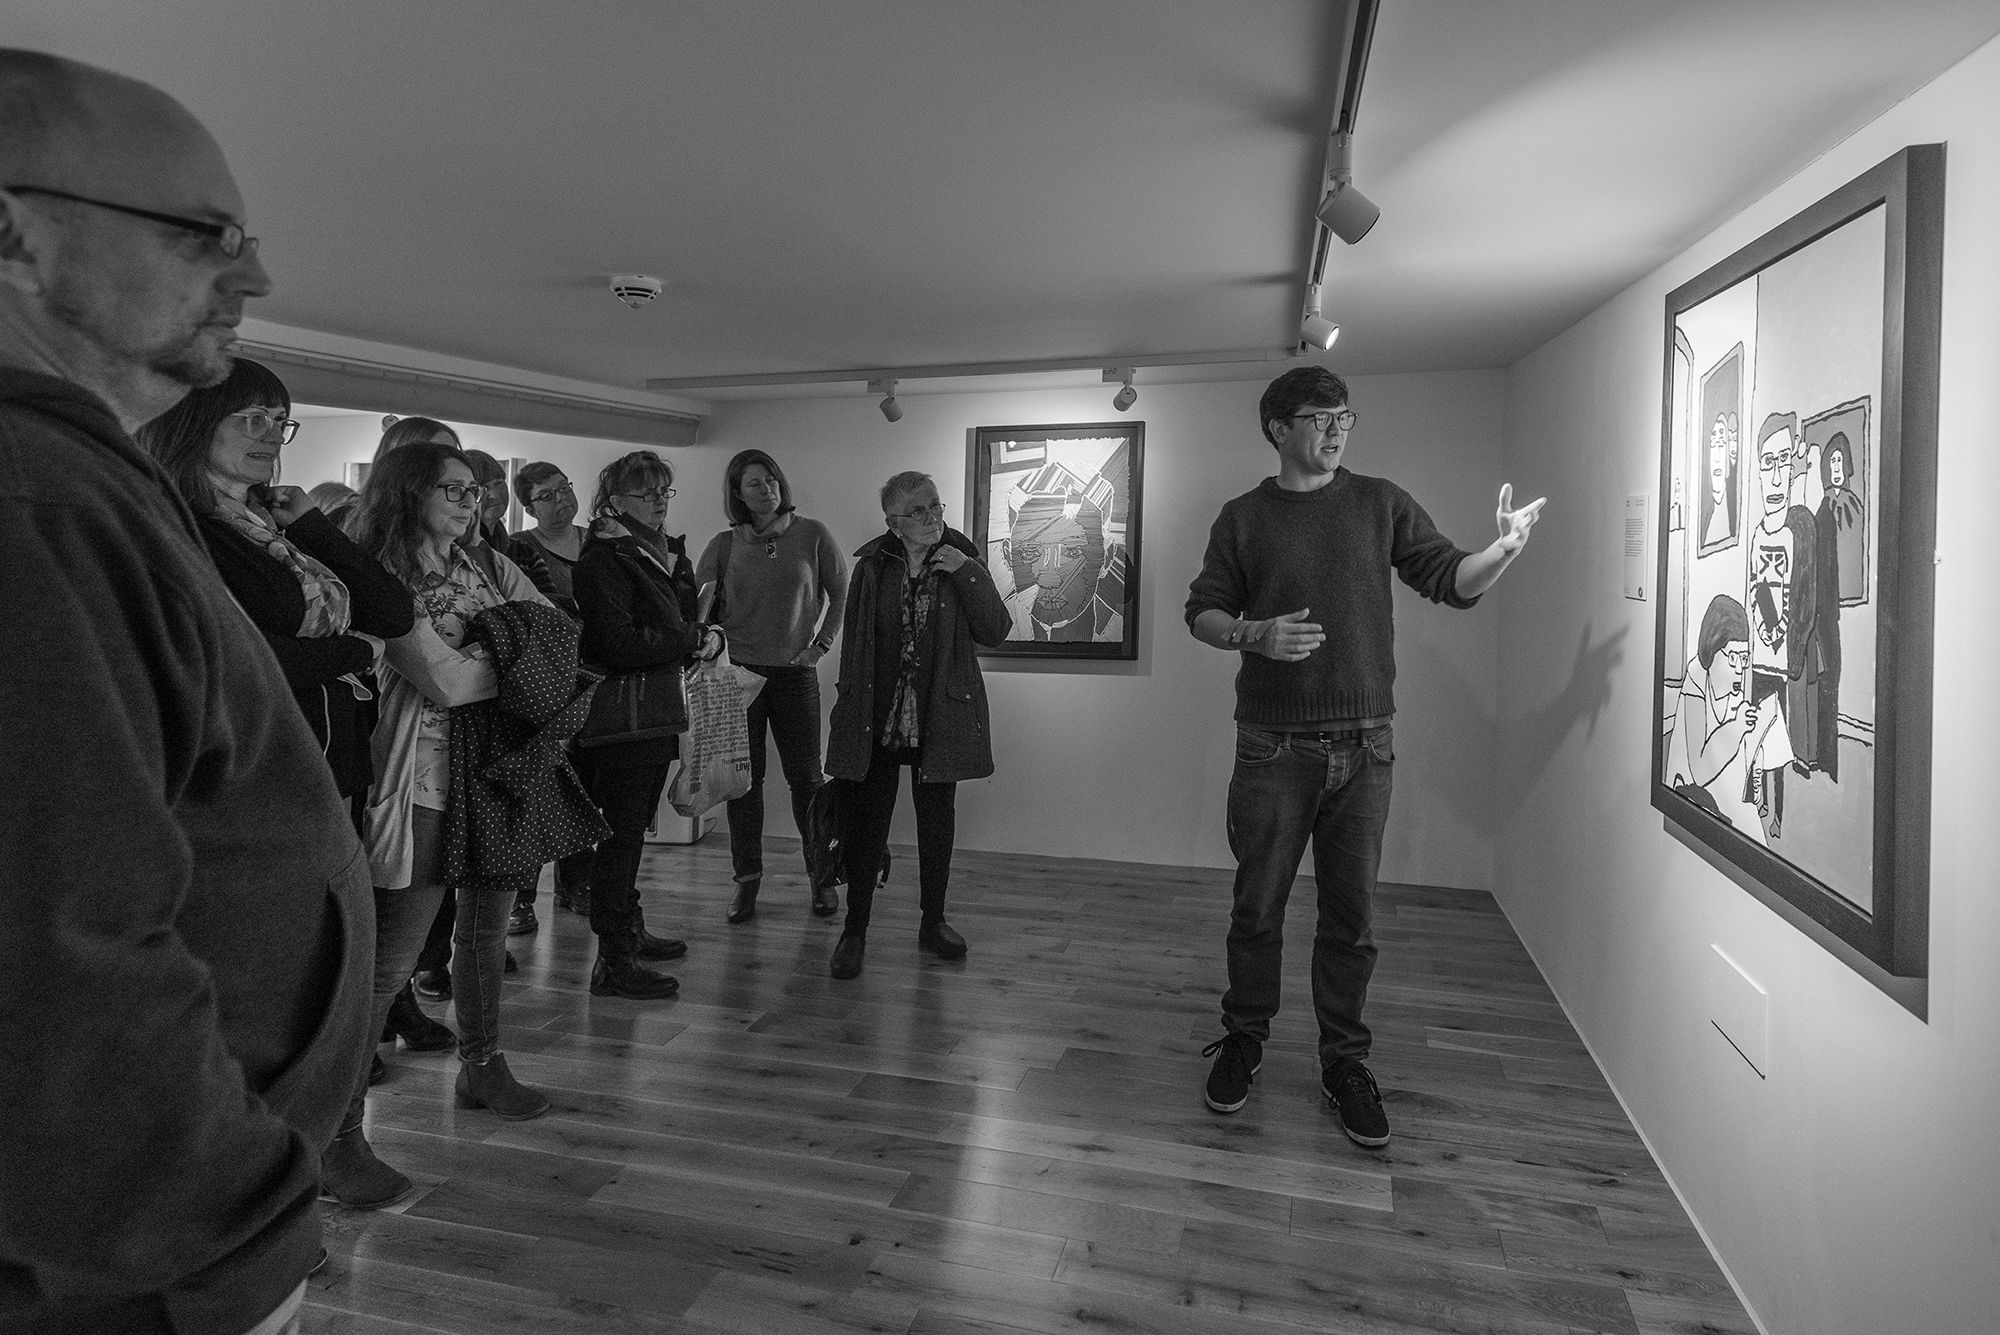 A man presents a painting in a gallery to a small crowd of people